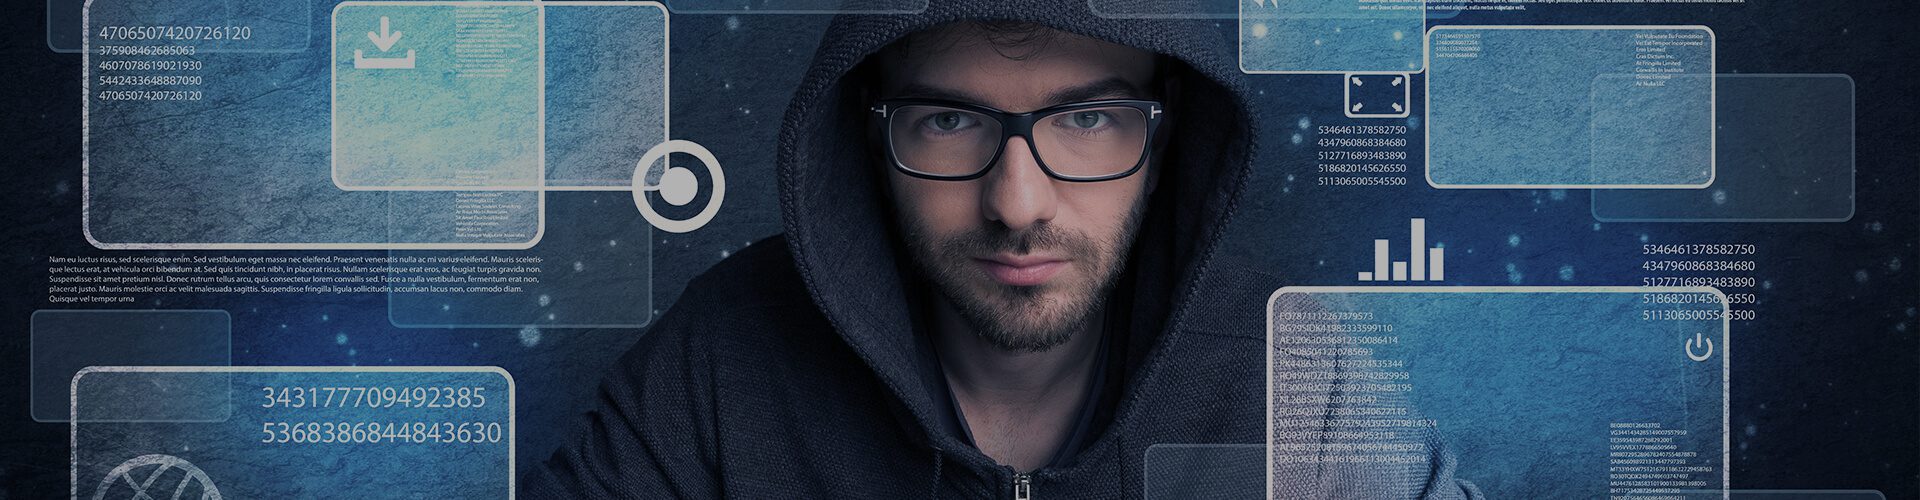 man wearing glasses and hoodie working on protection from data breach